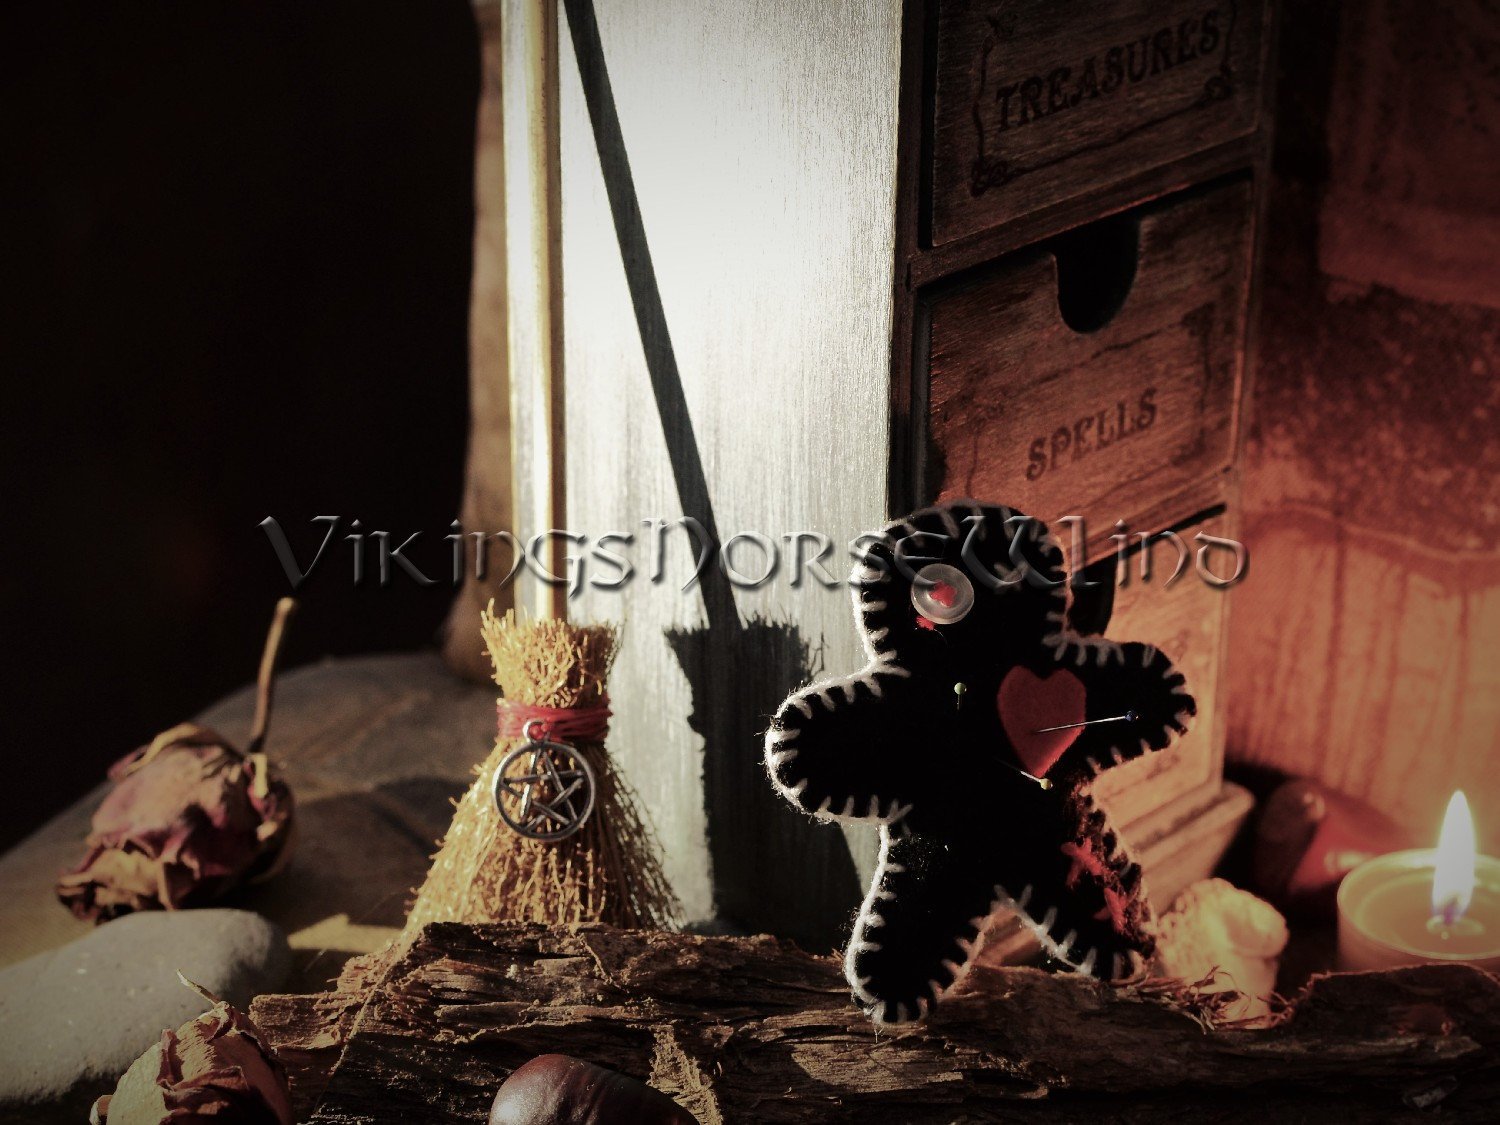 Voodoo Doll, Mini Witch Poppet, Hoodoo Decor TheNorseWind